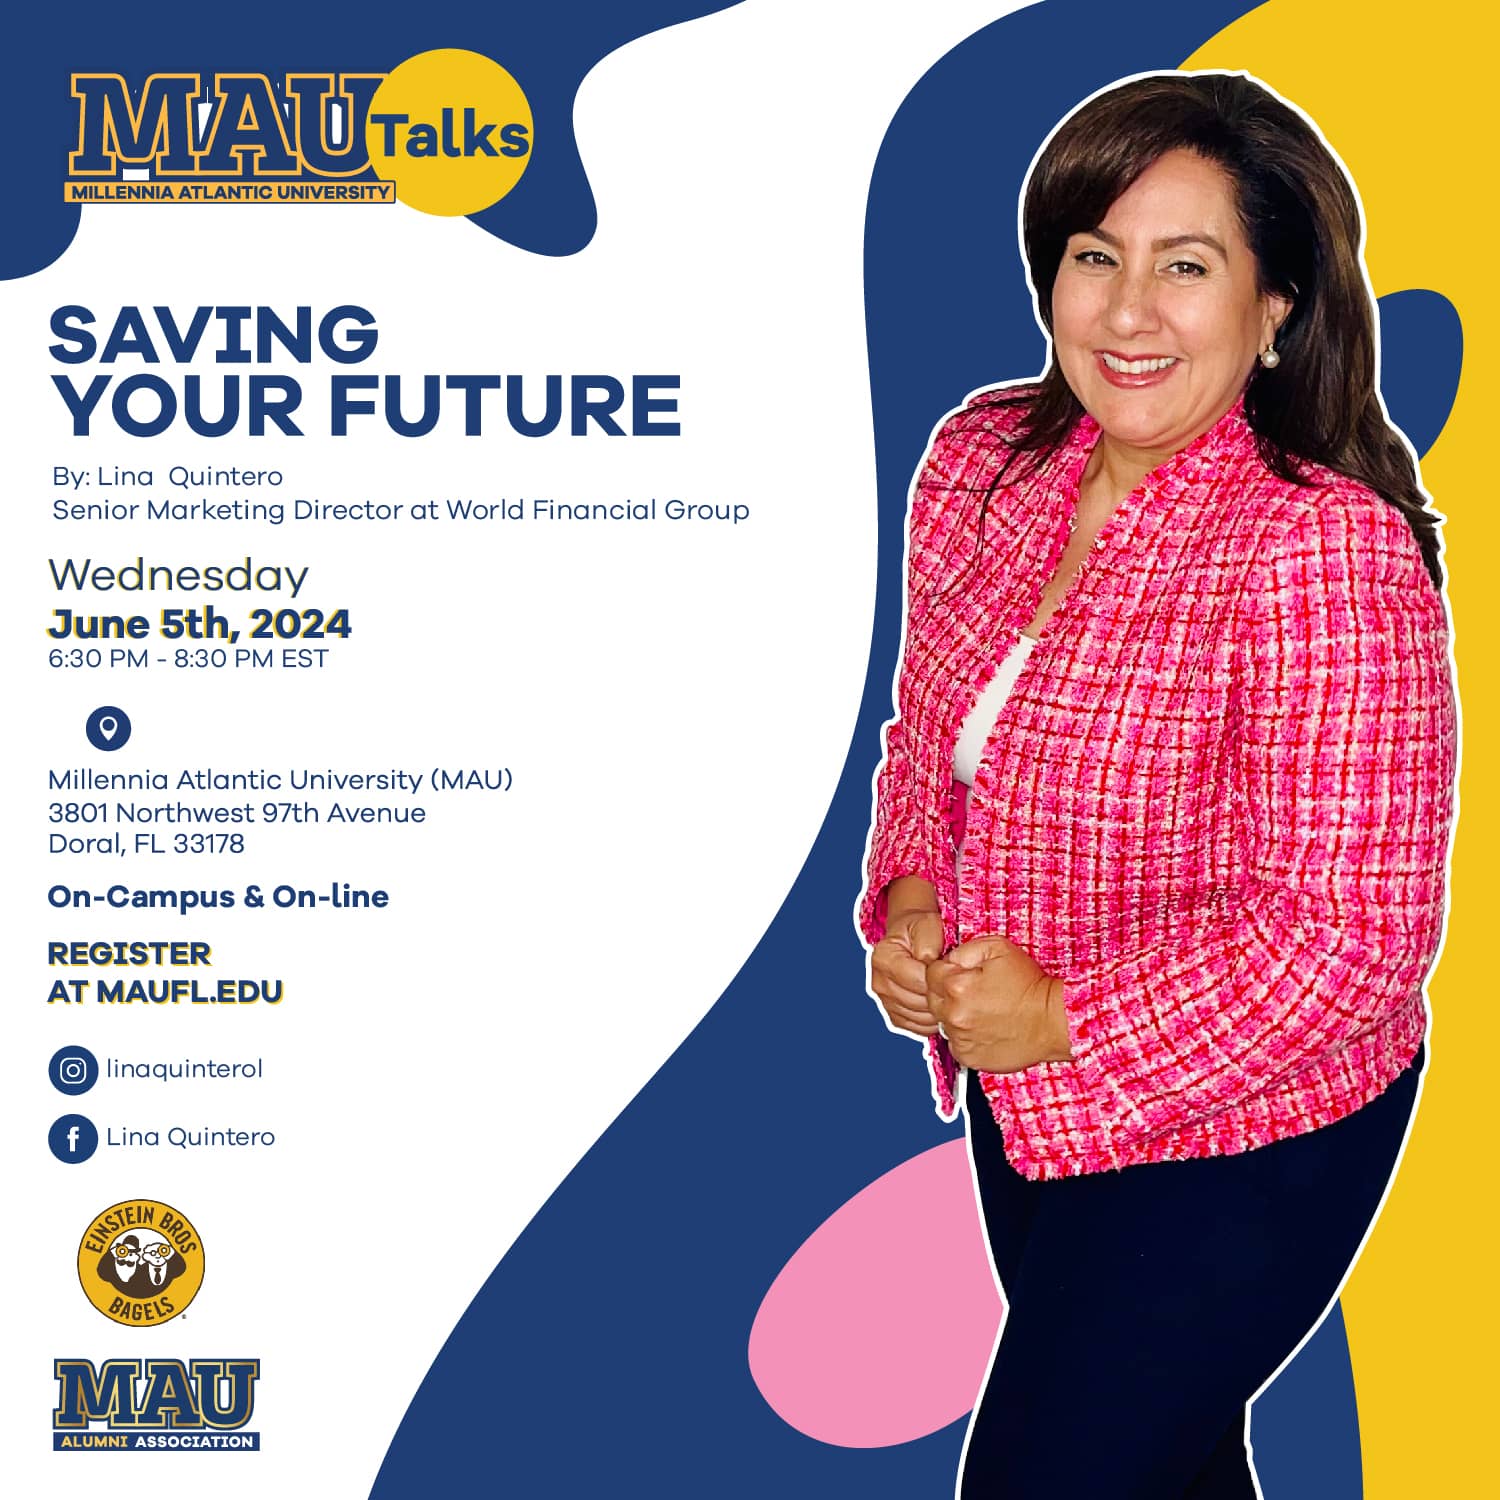 Millennia Atlantic University MAU Talks: Saving your FutureSaving Your Future will emphasize the importance of Financial Literacy, you will learn concepts and strategies needed to reach the future that you want.